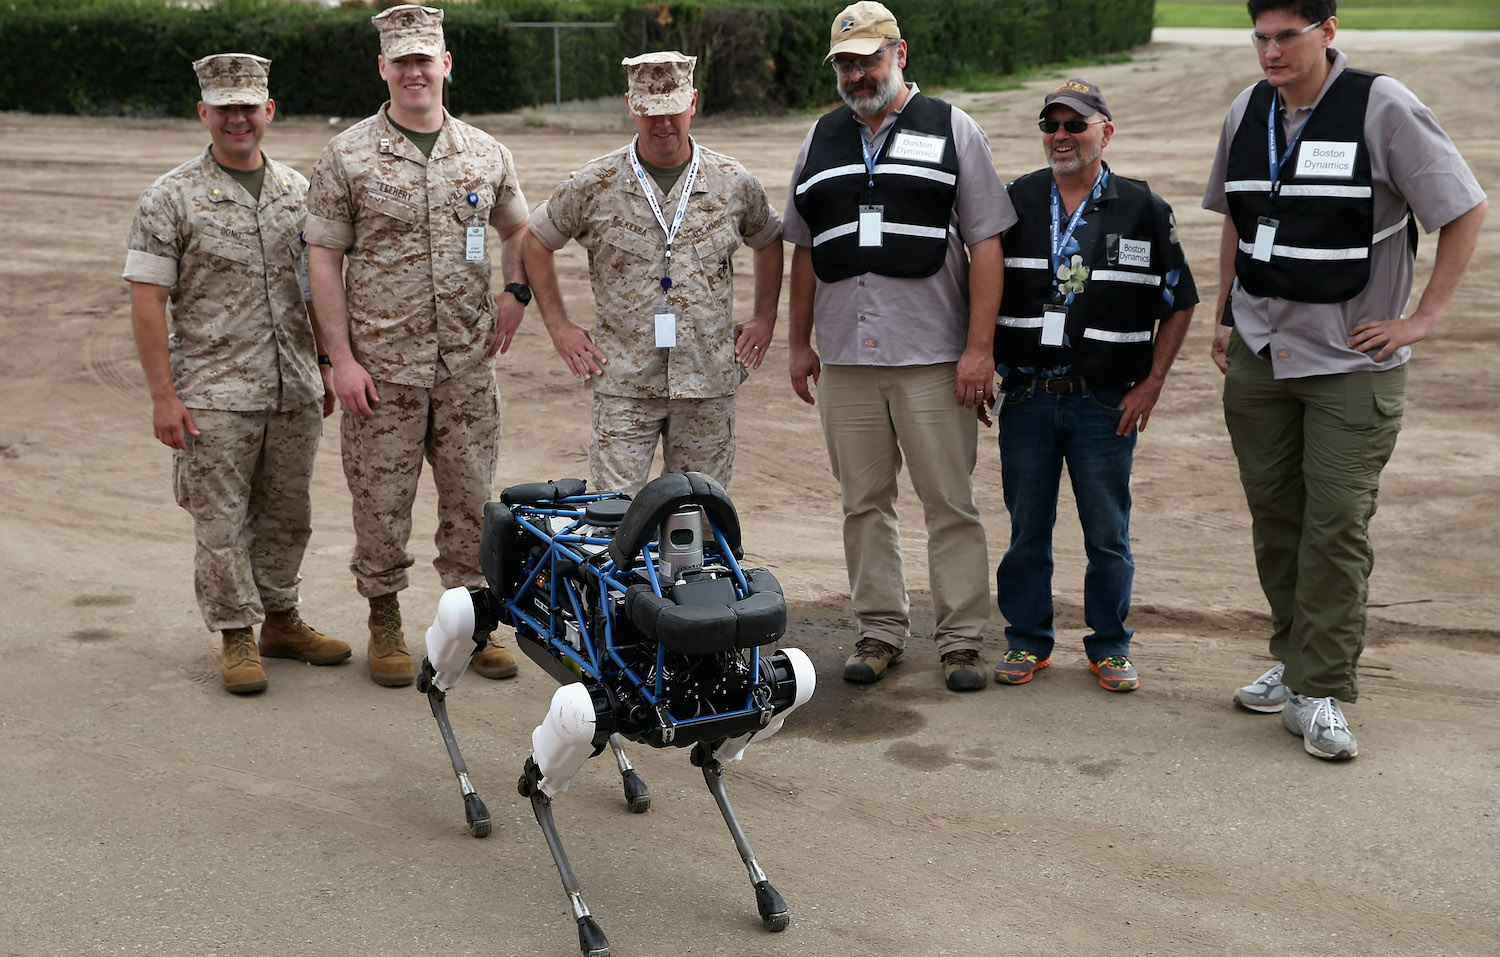 Spot competes at the DARPA Robotics Challenge Showcases Cutting Edge In Artificial Intelligence